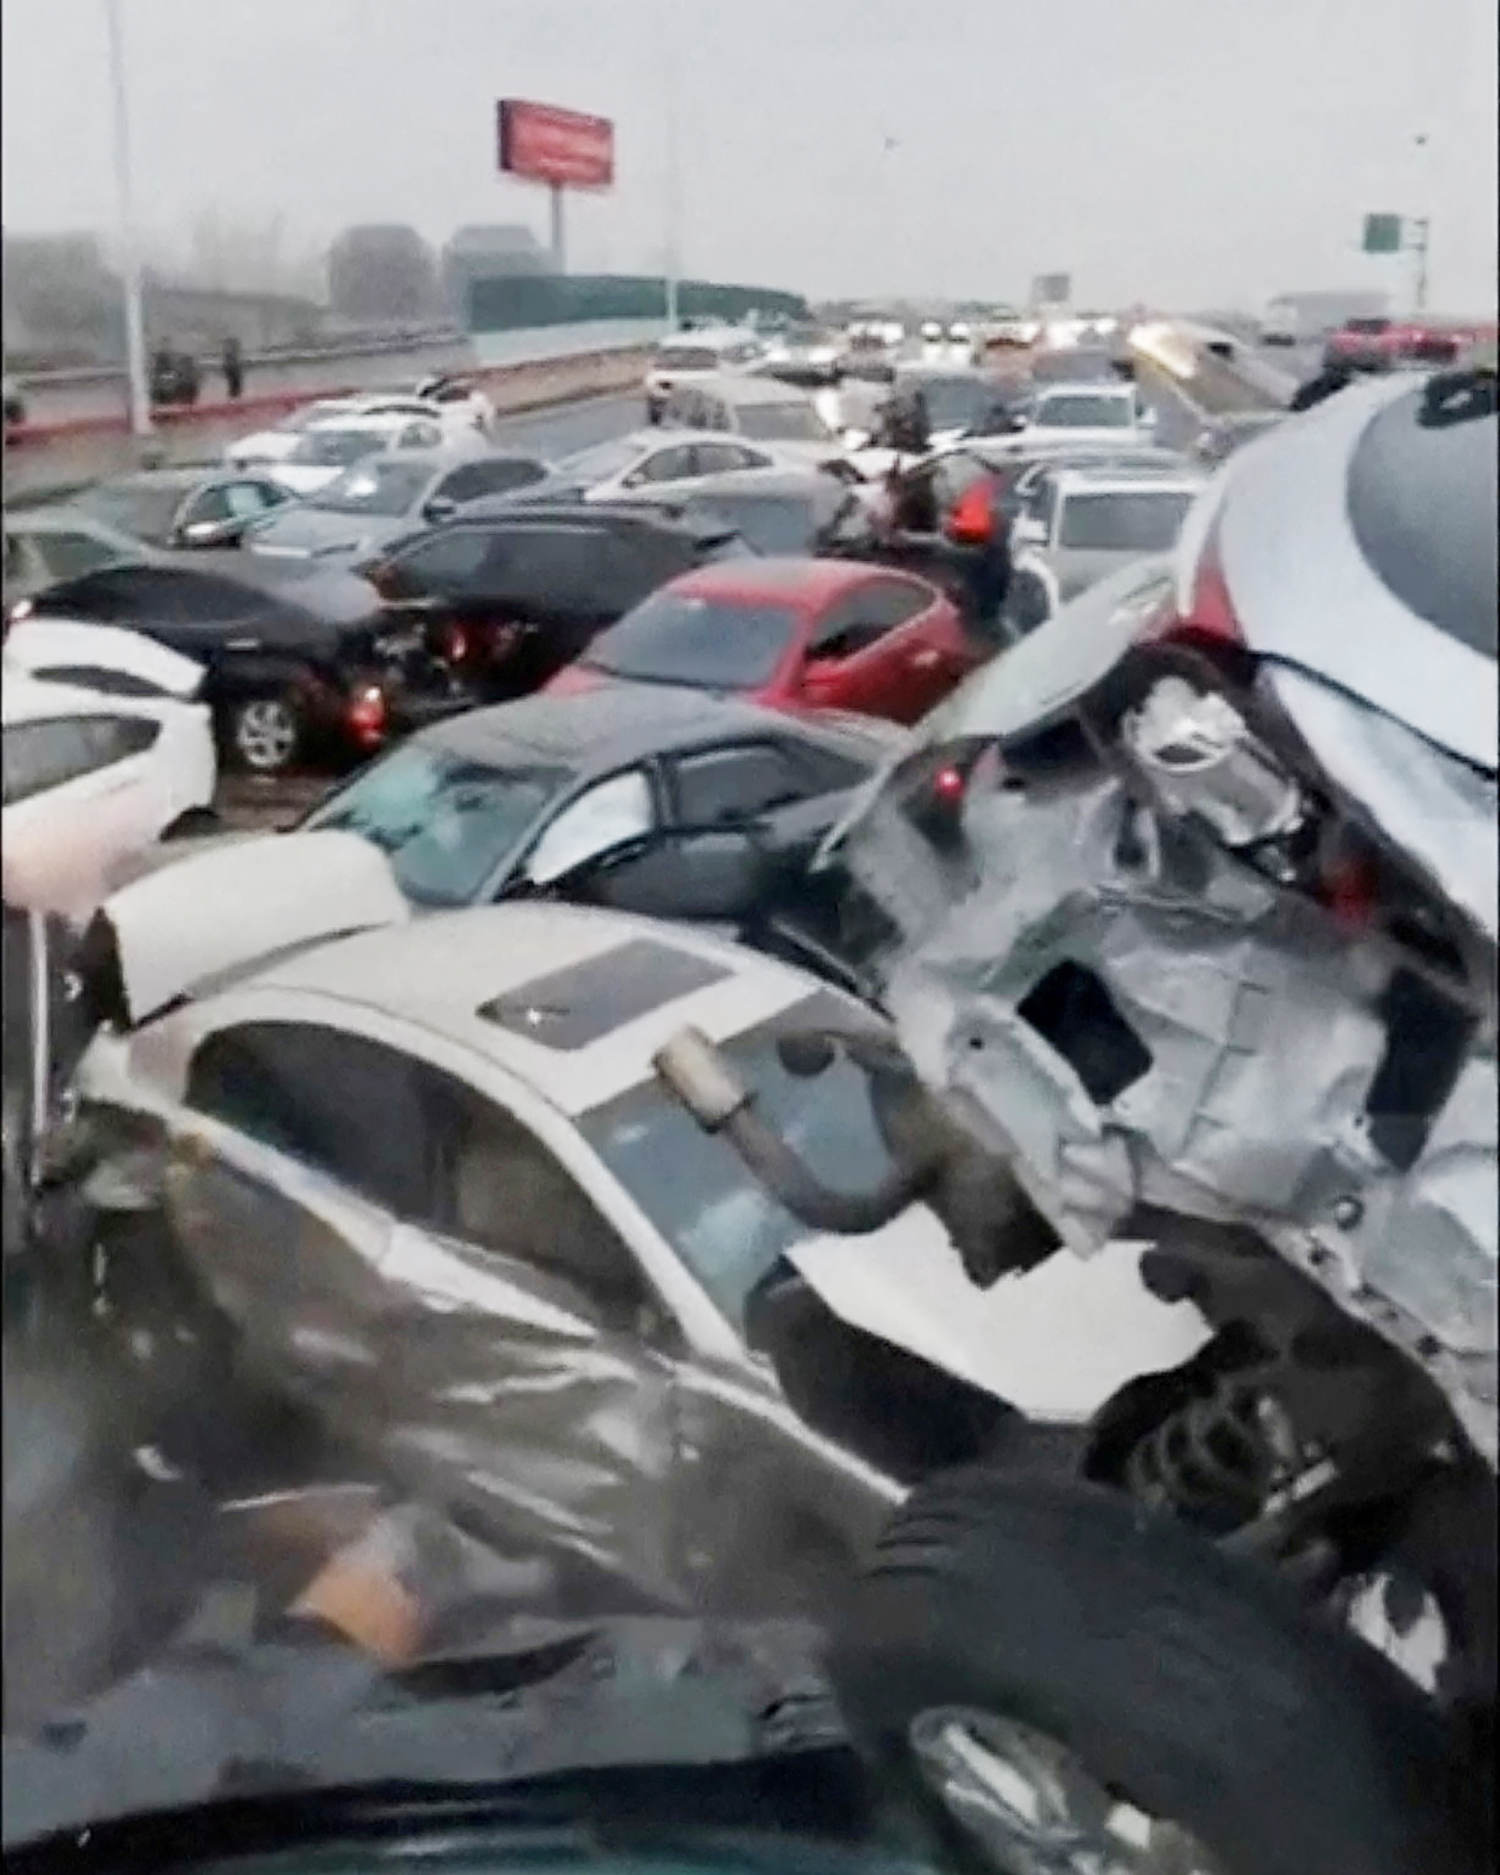 100-car pile-up snarls traffic in China as cold snap disrupts travel across country